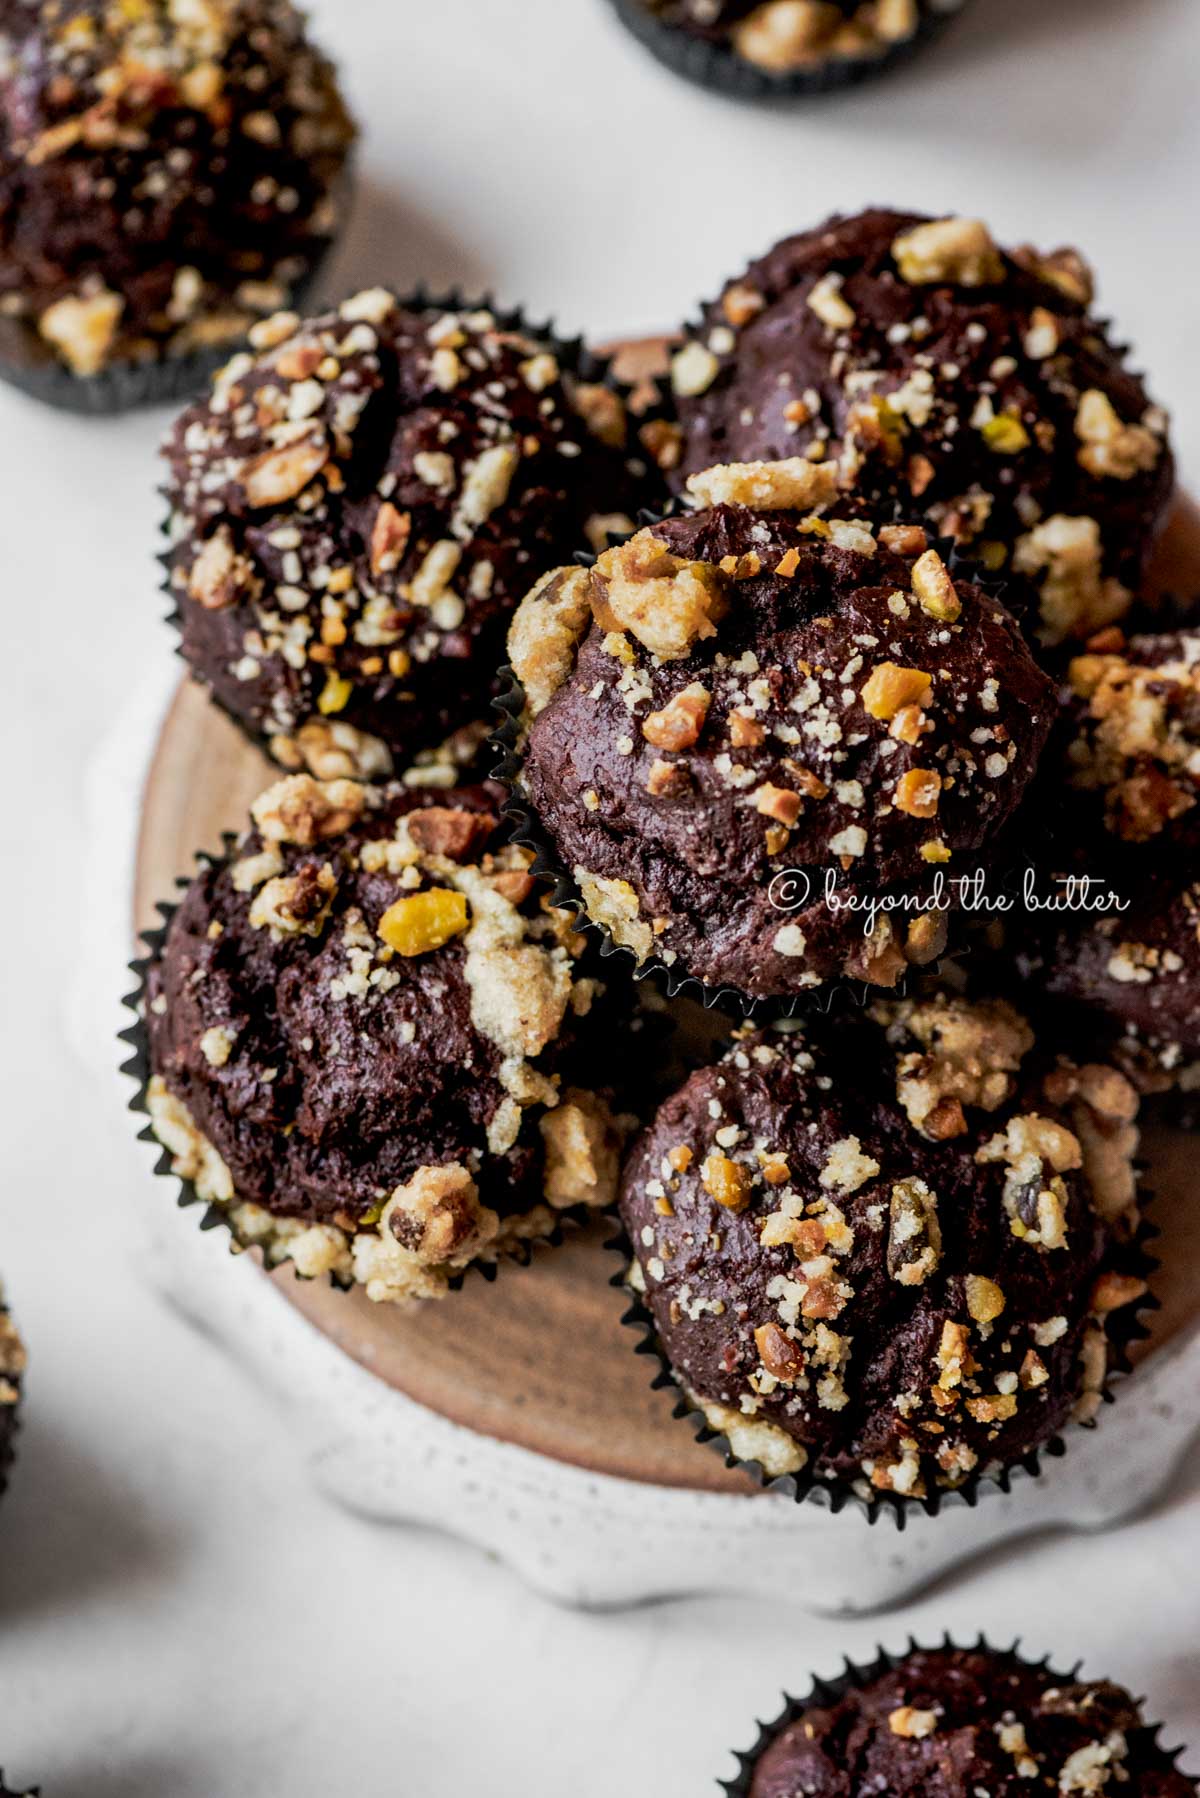 Small plate of dark chocolate pistachio cream cheese muffins on gray background | All Images © Beyond the Butter®